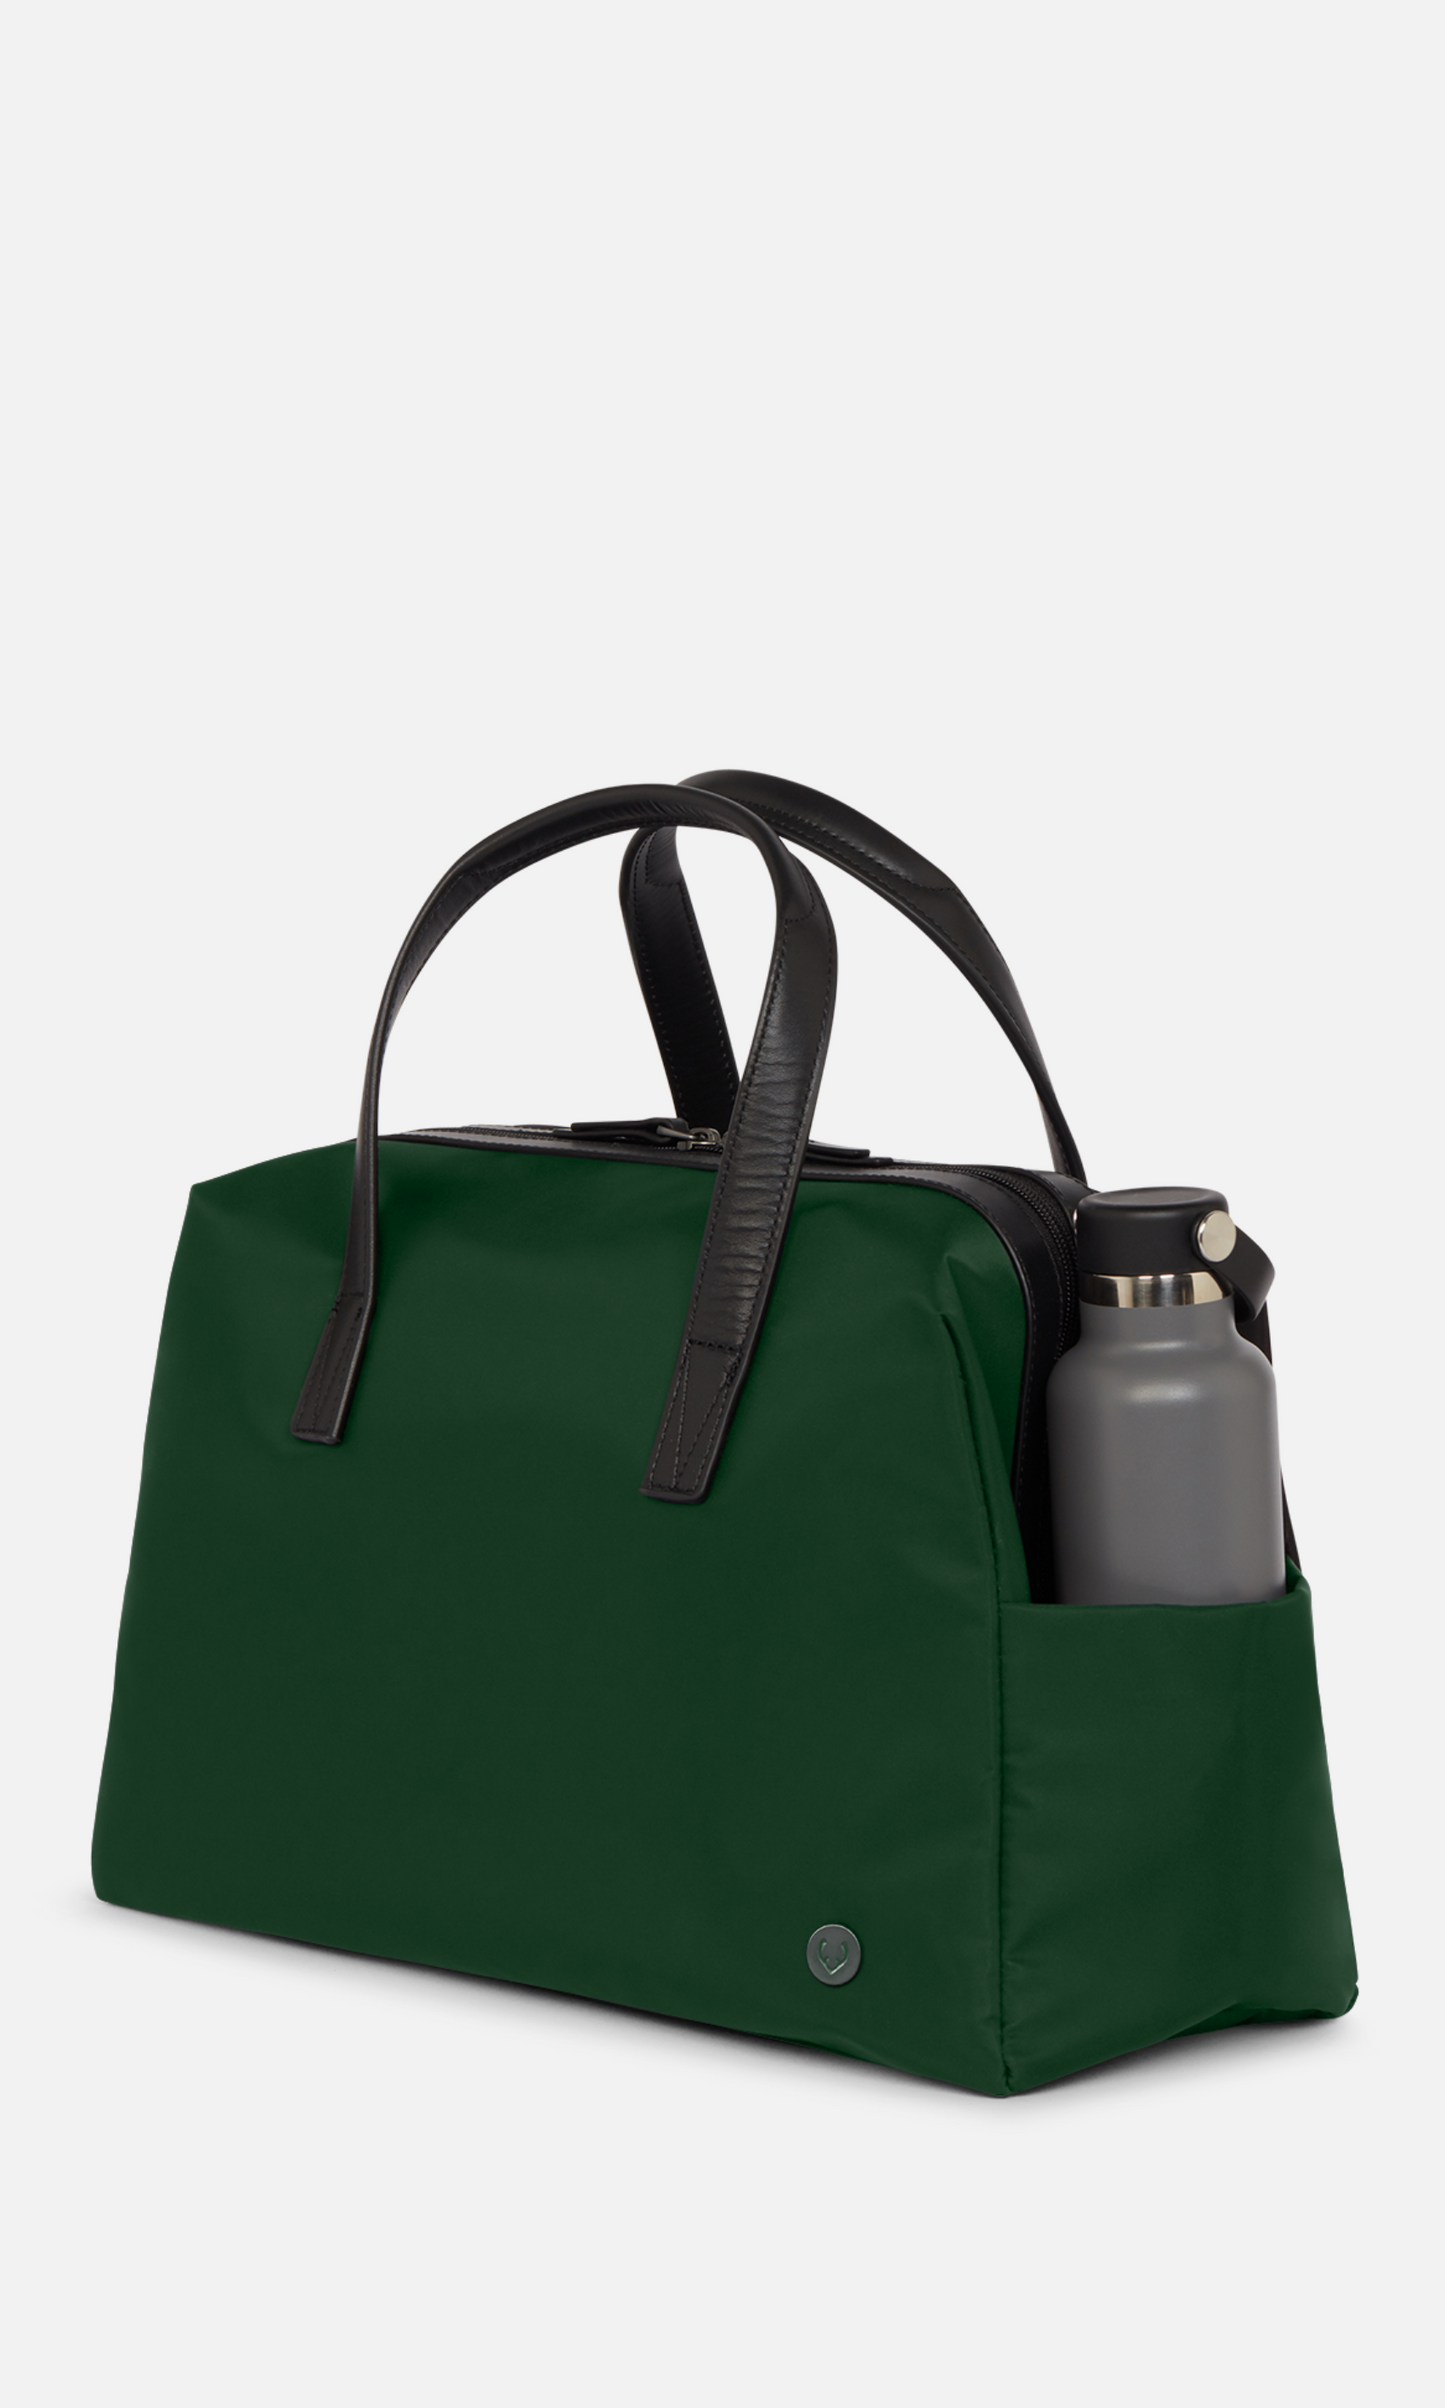 Chelsea overnight bag in woodland green